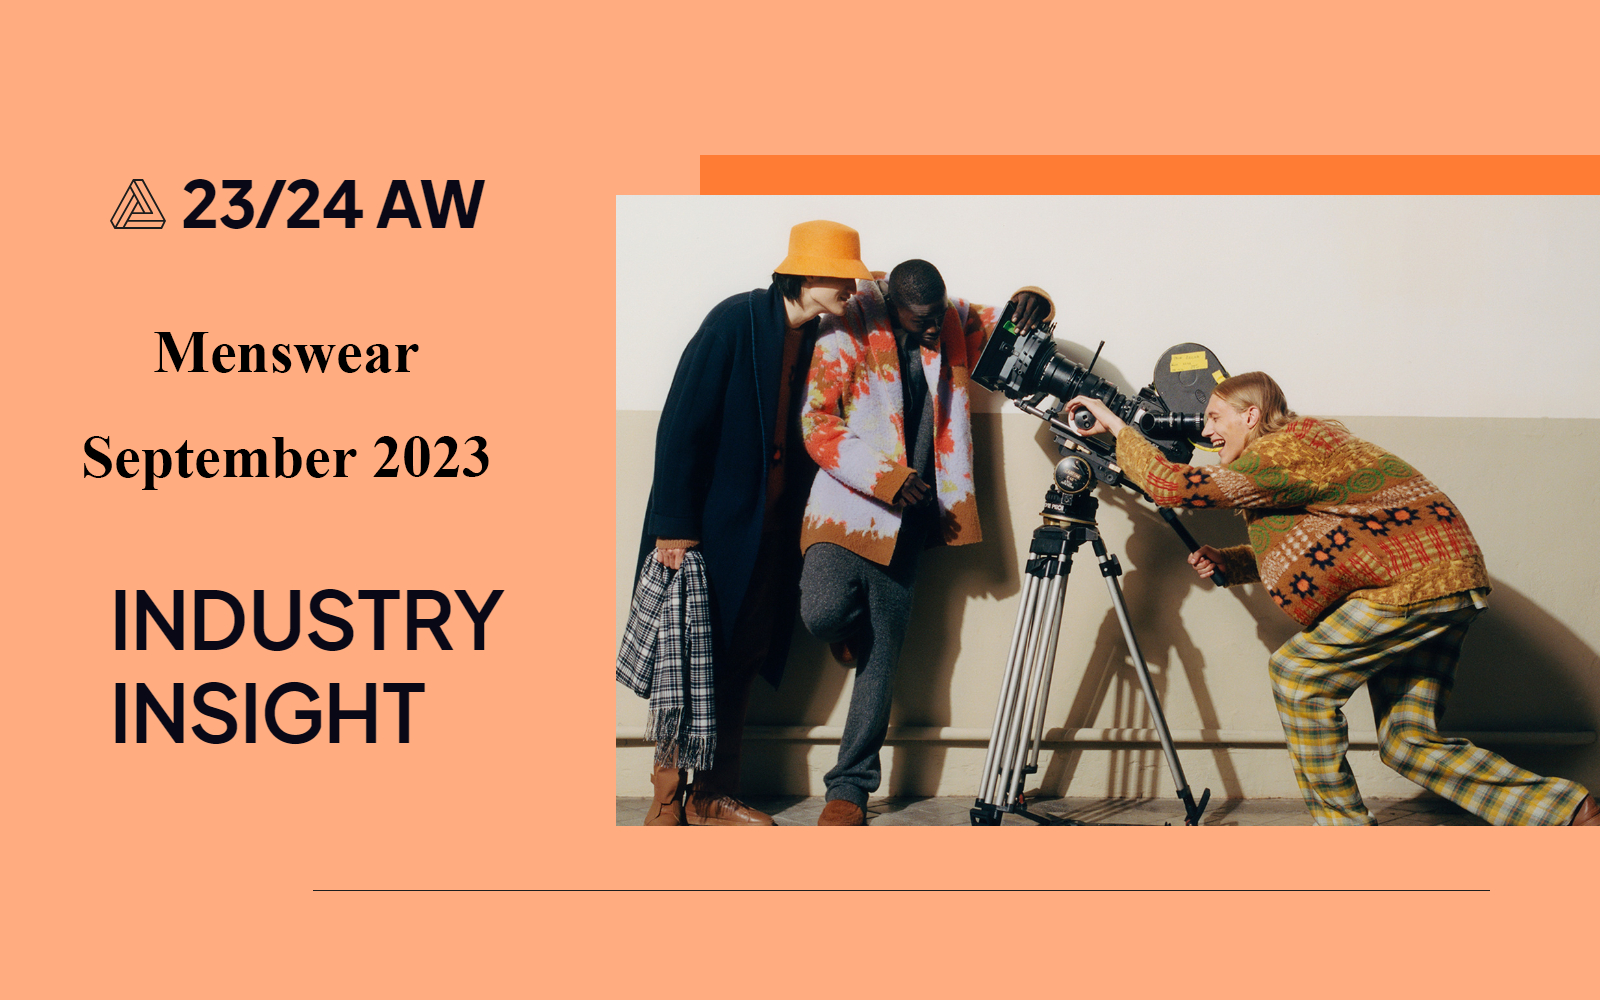 September 2023 -- The Industry Insight of Menswear